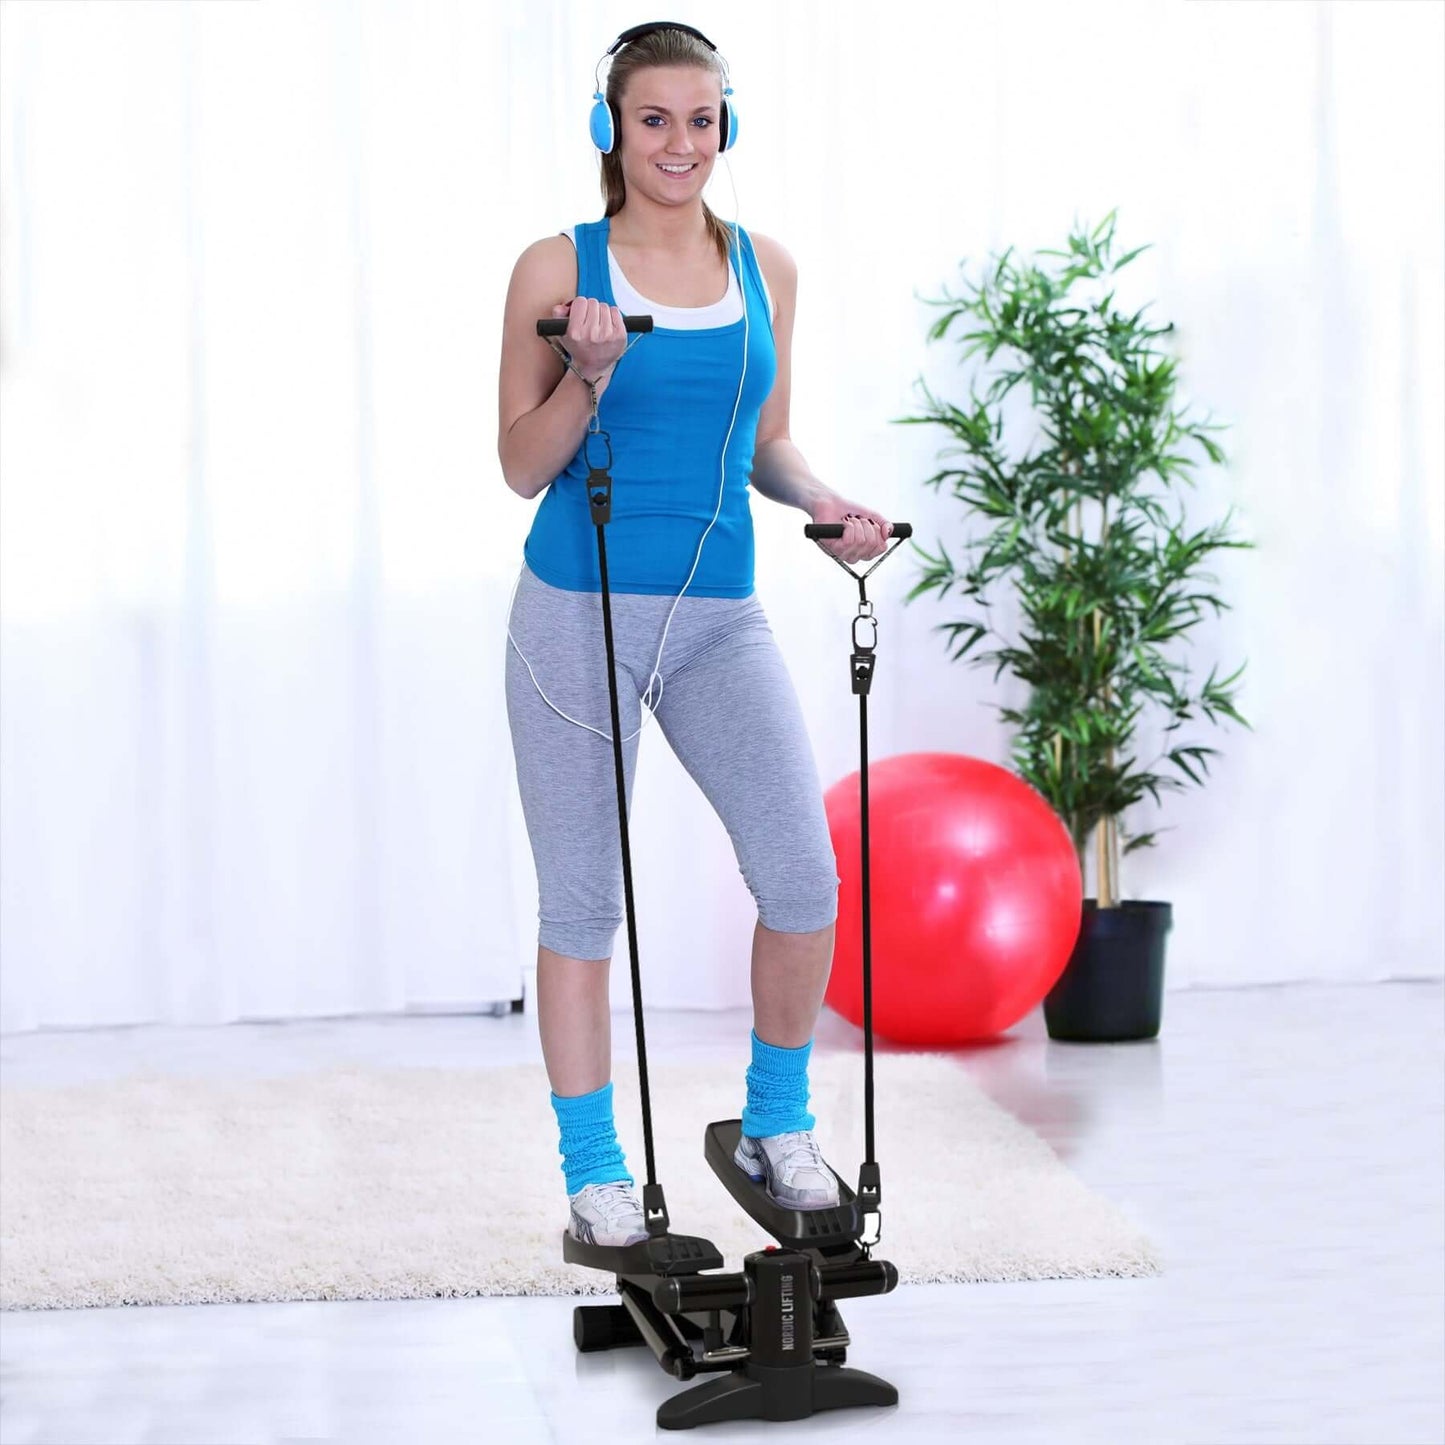 Home Workout Mini Stepper - w/ Resistance Bands Set and Built-in Tracking Monitor